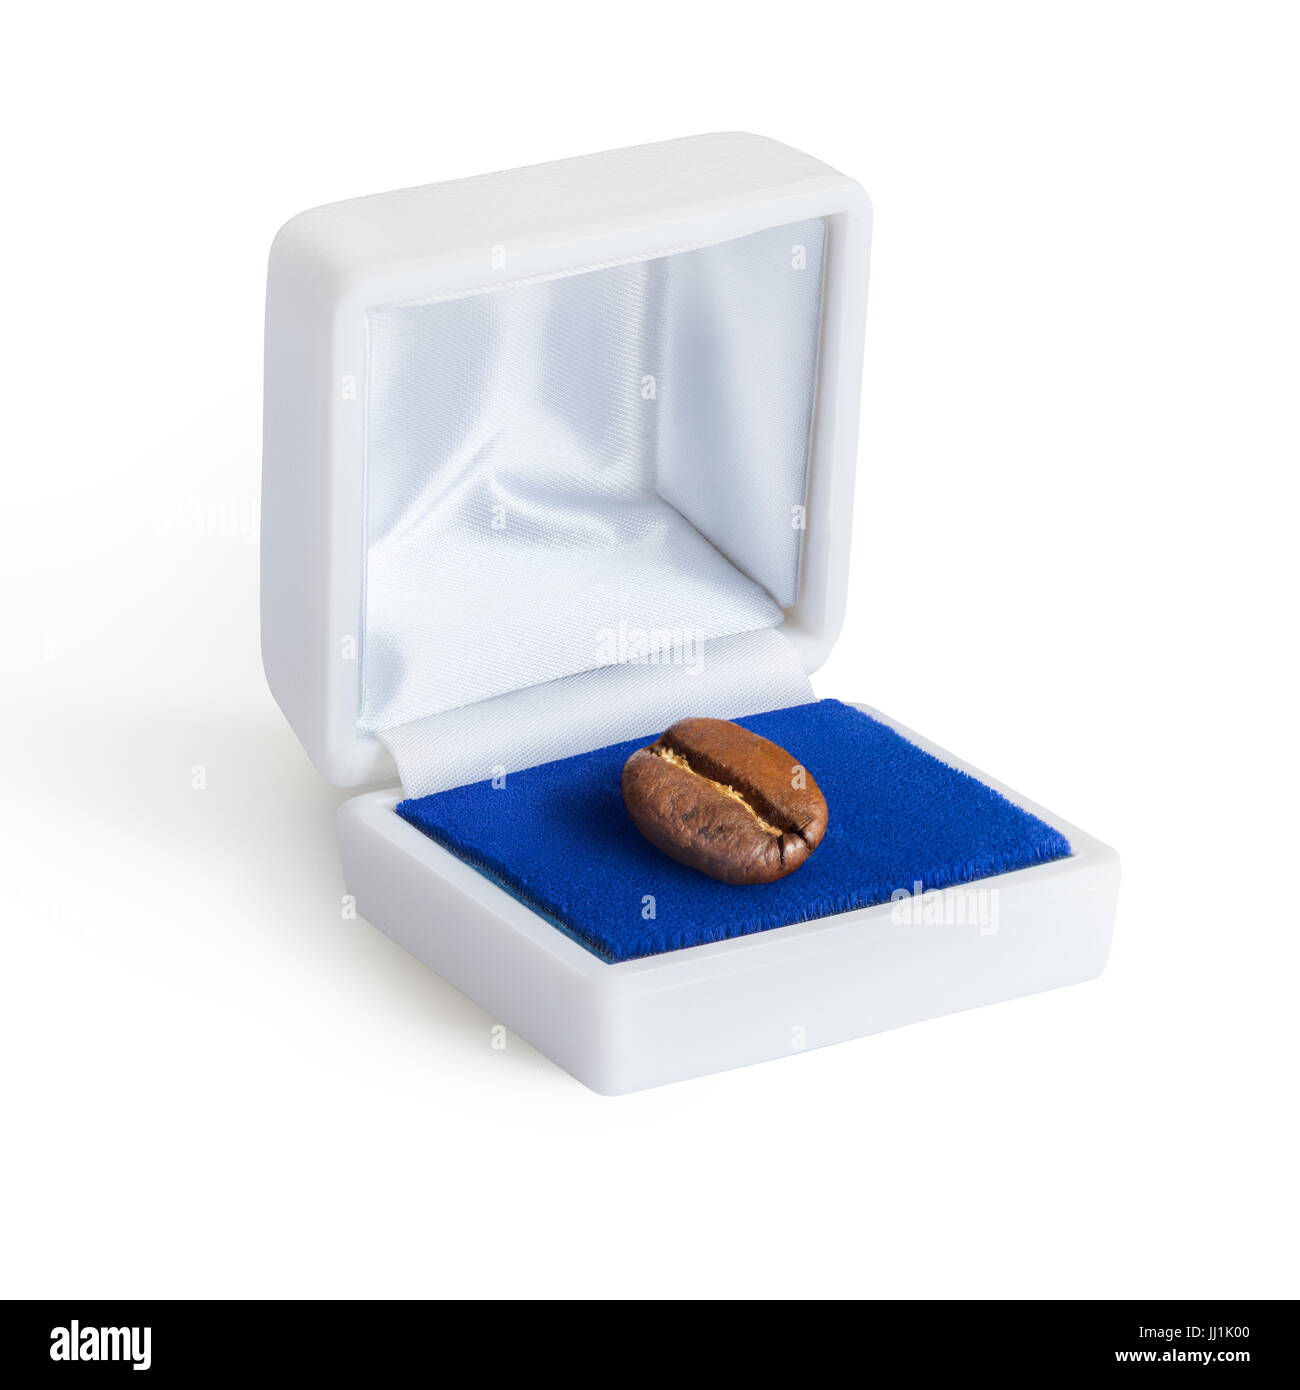 Creative concept photo of a jewelry box with a coffee bean on white background. Stock Photo